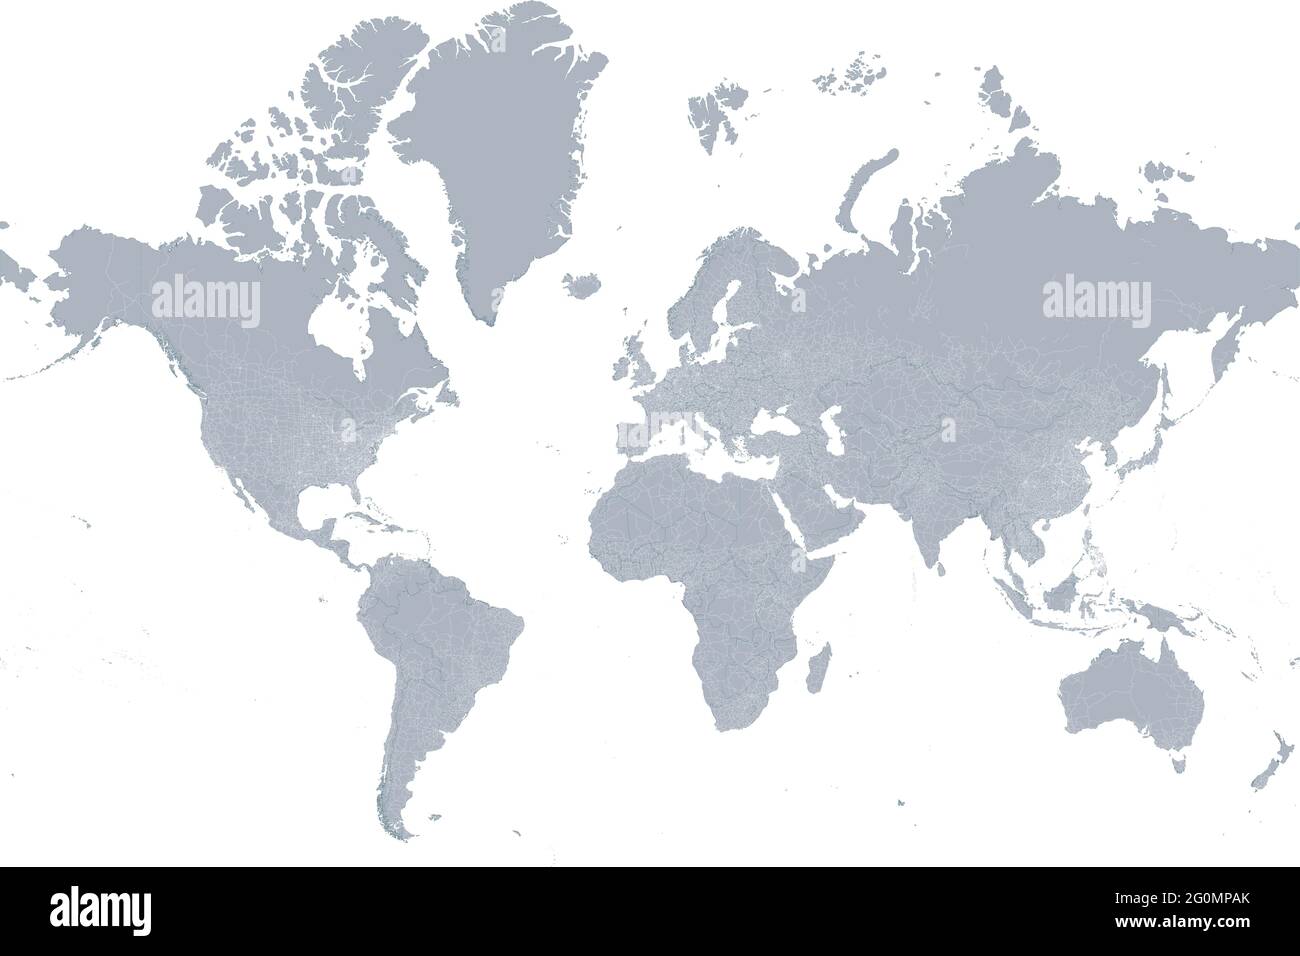 Map of the world, roads and states. State borders and main roads in the world. Map of land transport, connecting routes between the various countries Stock Vector